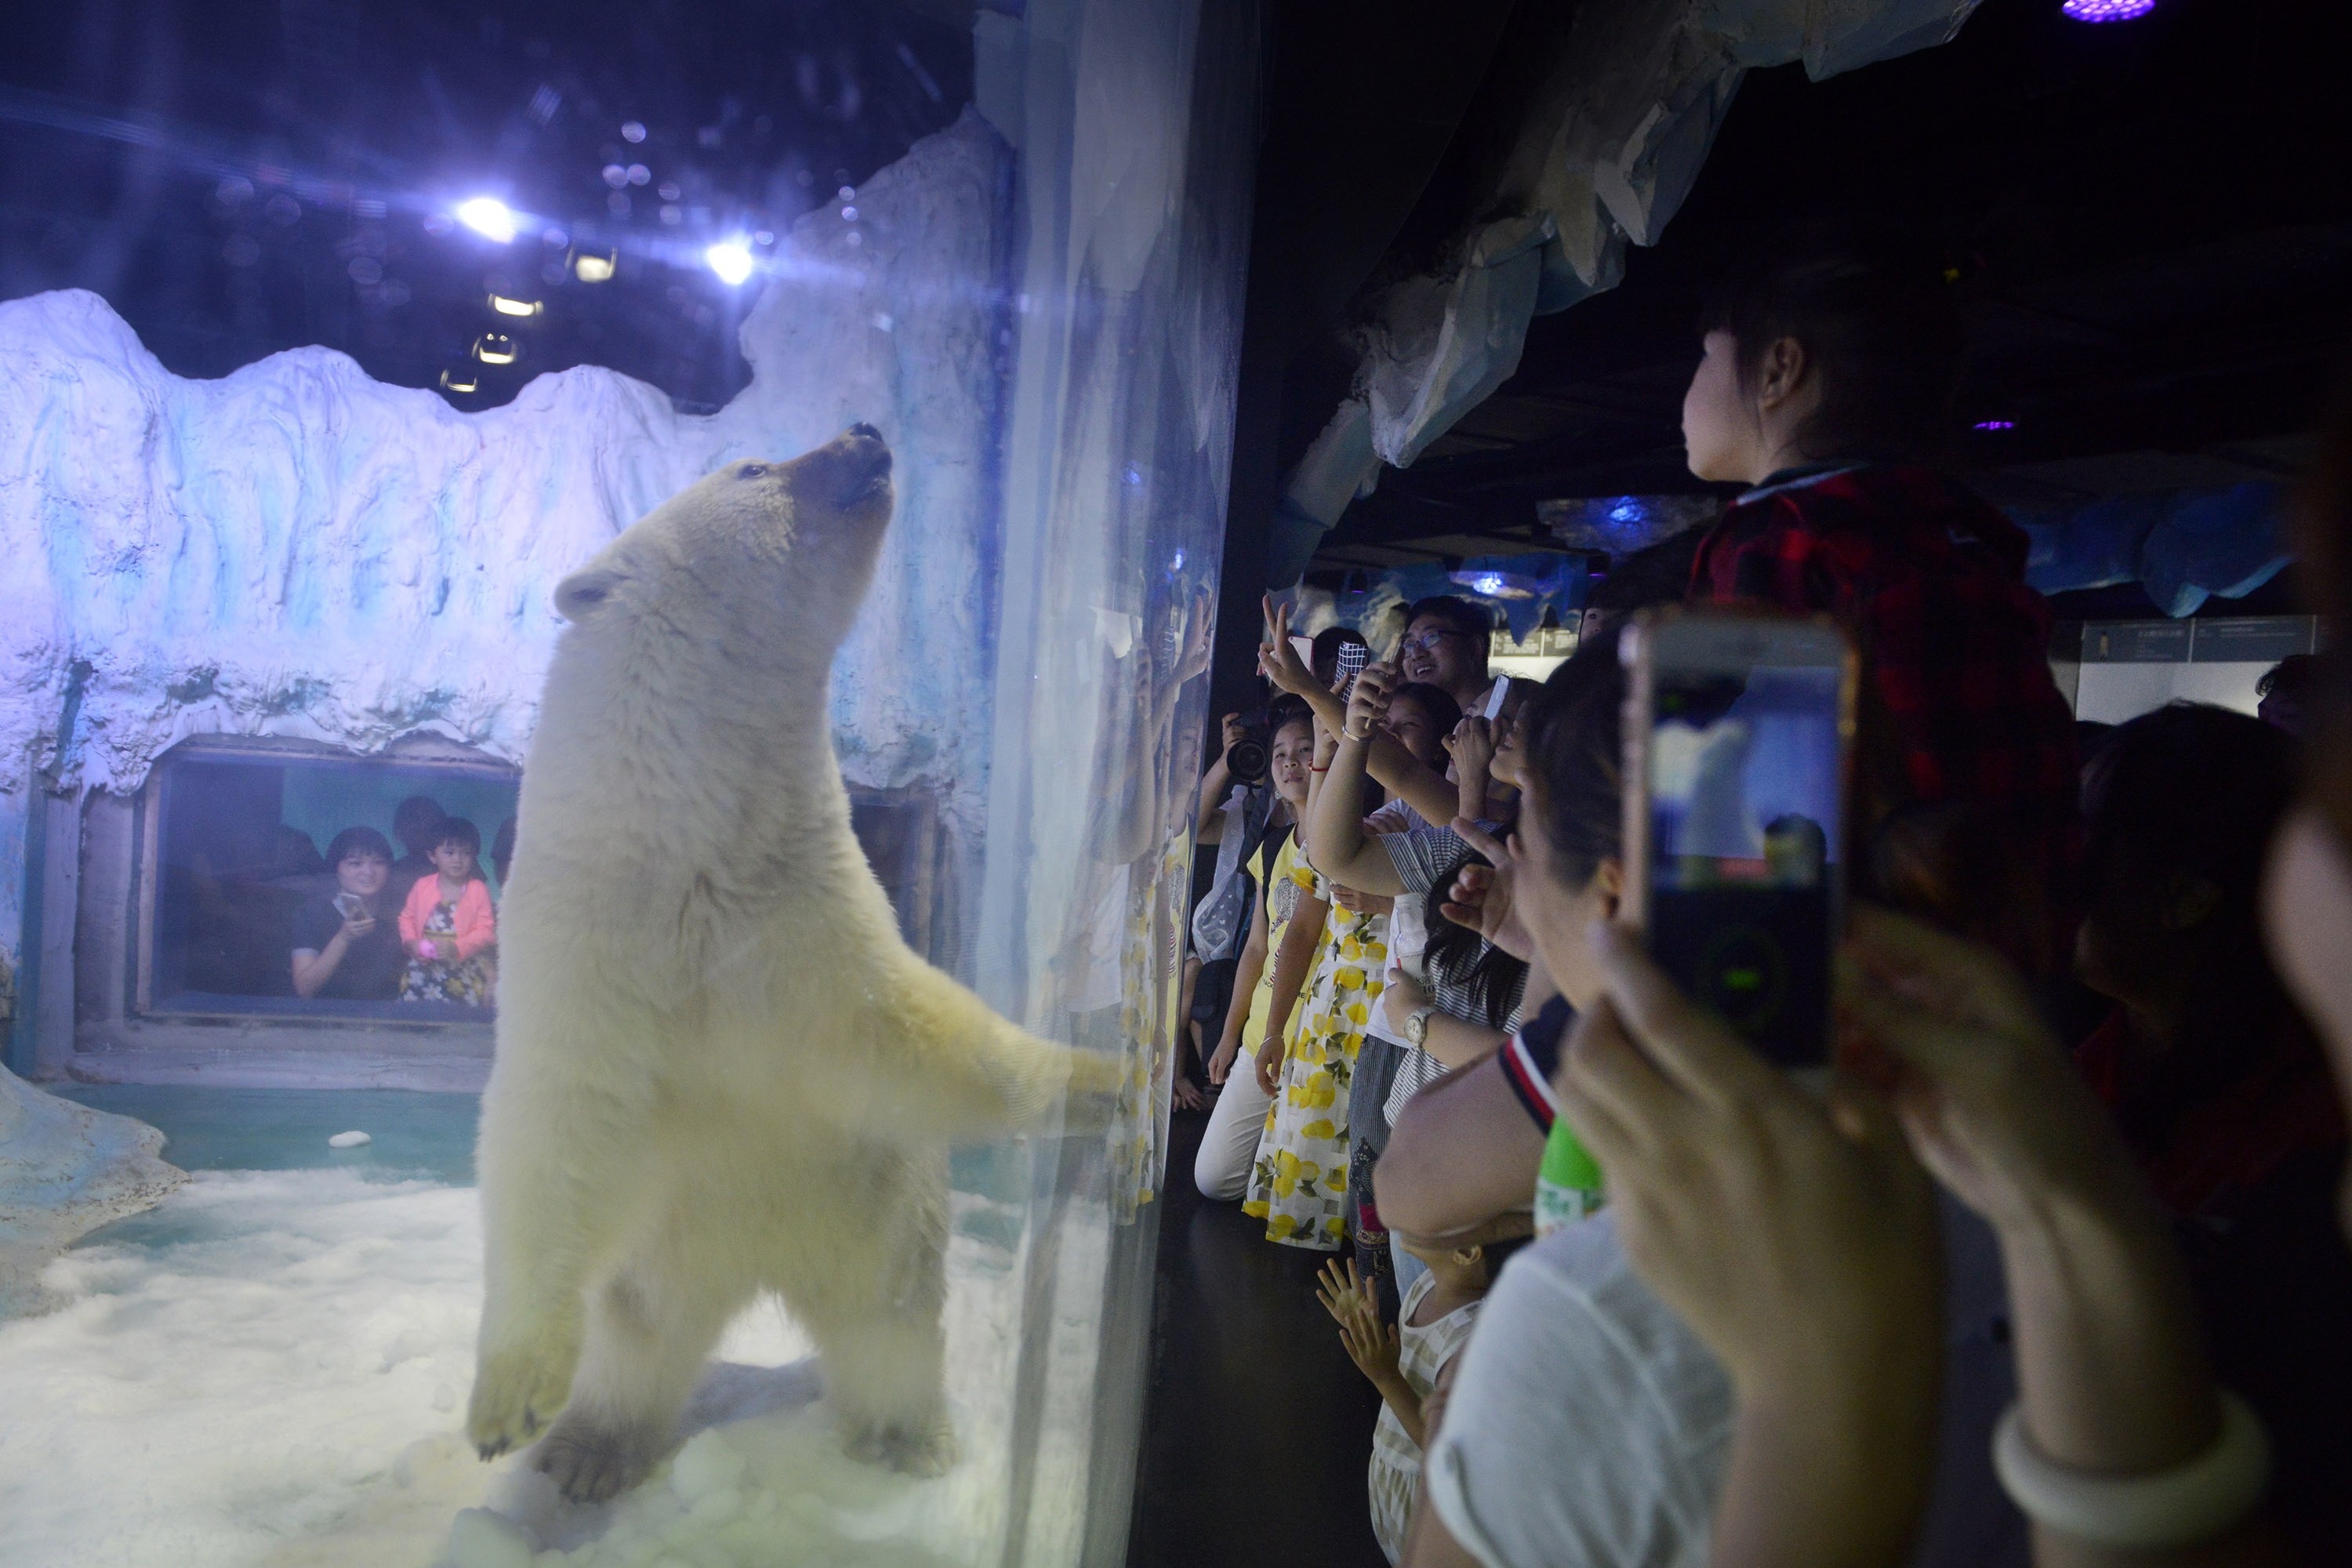 This picture taken on July 24, 2016 shows visitors taking photos of a polar bear inside its enclosure at the Grandview Mall Aquarium in the southern Chinese city of Guangzhou. A Chinese aquarium holding a forlorn-looking polar bear named Pizza said on September 20 it has "no need" for foreign interference, after activists offered to move the animal to a British zoo. / AFP PHOTO / -